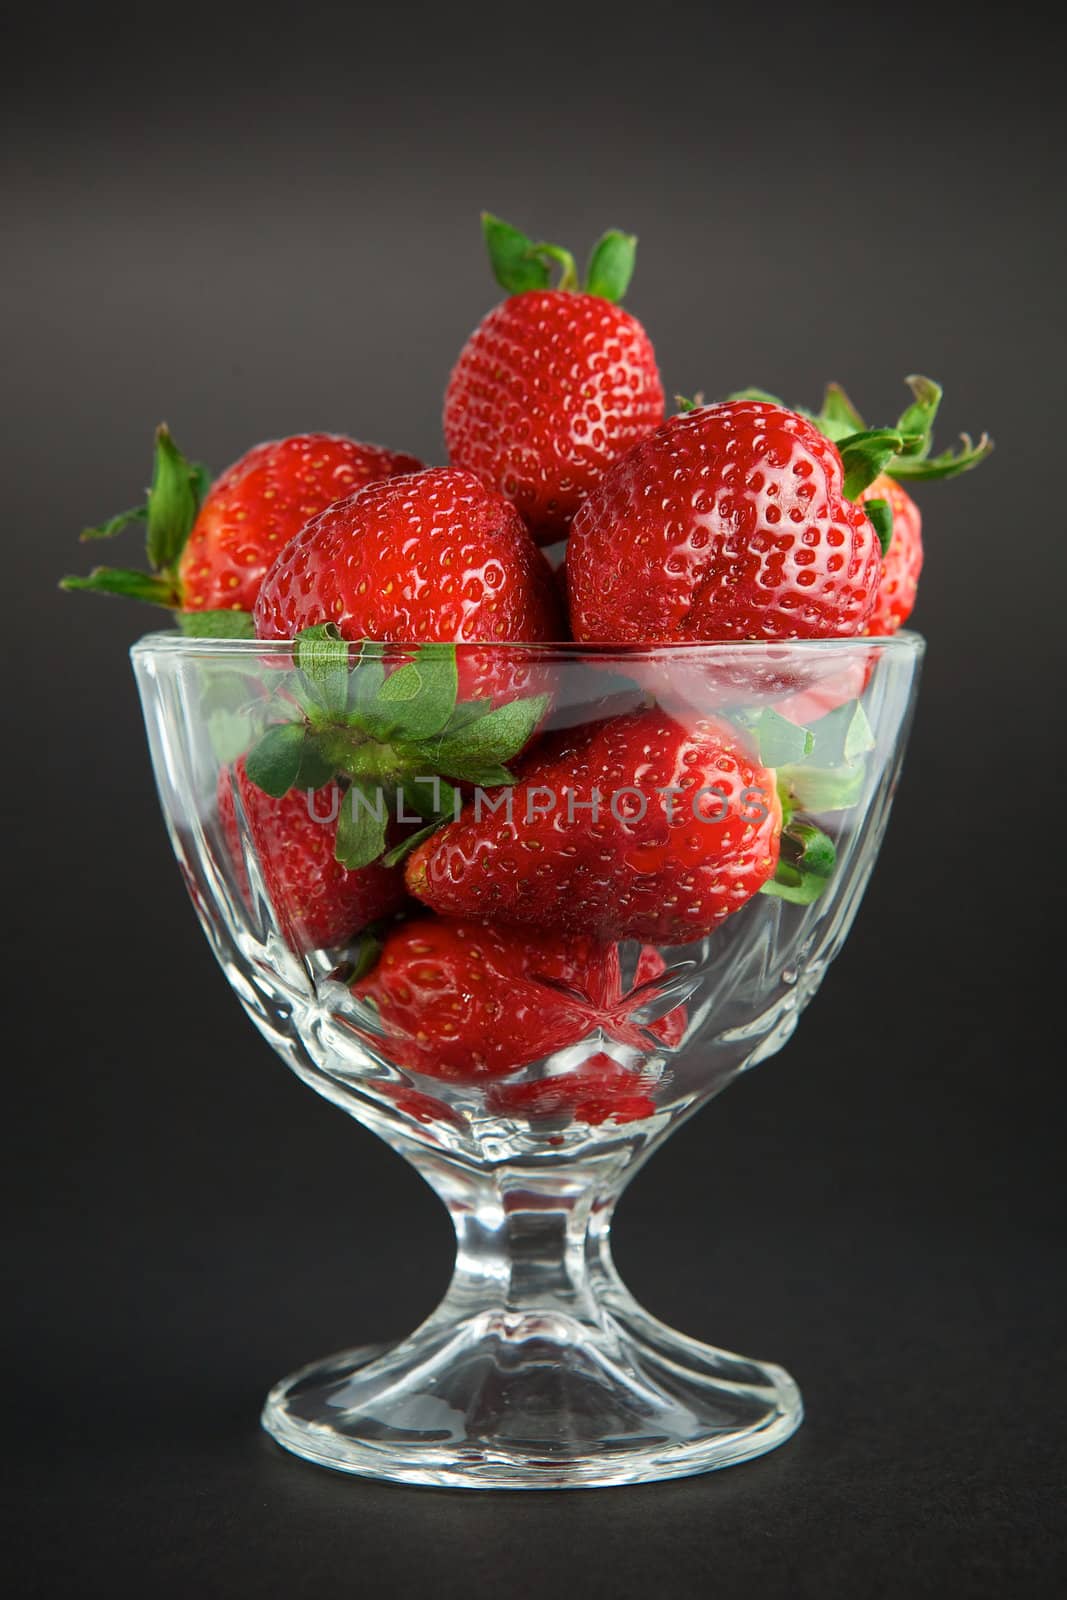 Strawberry in glass container on black background